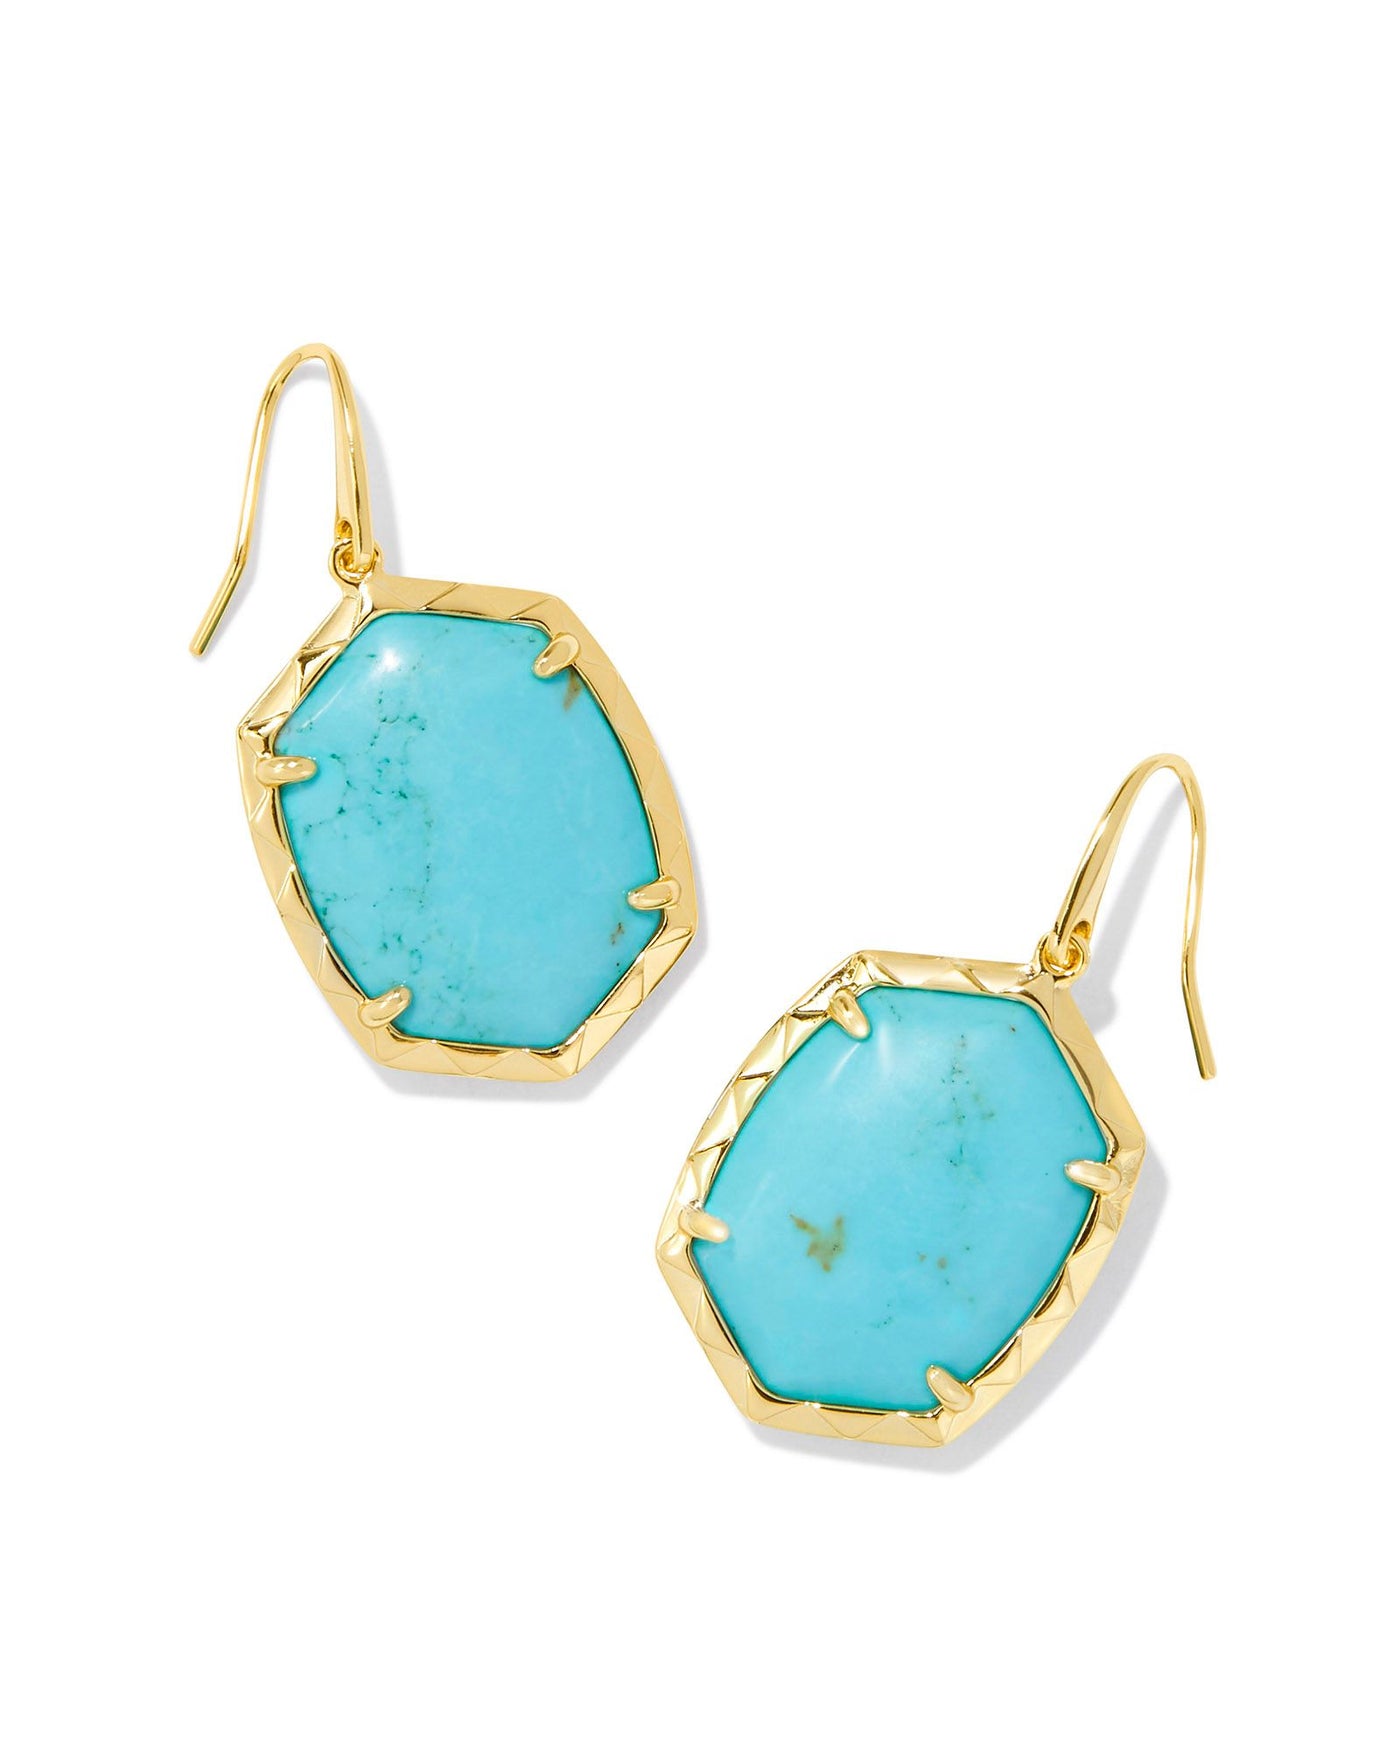 Kendra Scott Daphne Drop Earrings-Earrings-Kendra Scott-Market Street Nest, Fashionable Clothing, Shoes and Home Décor Located in Mabank, TX